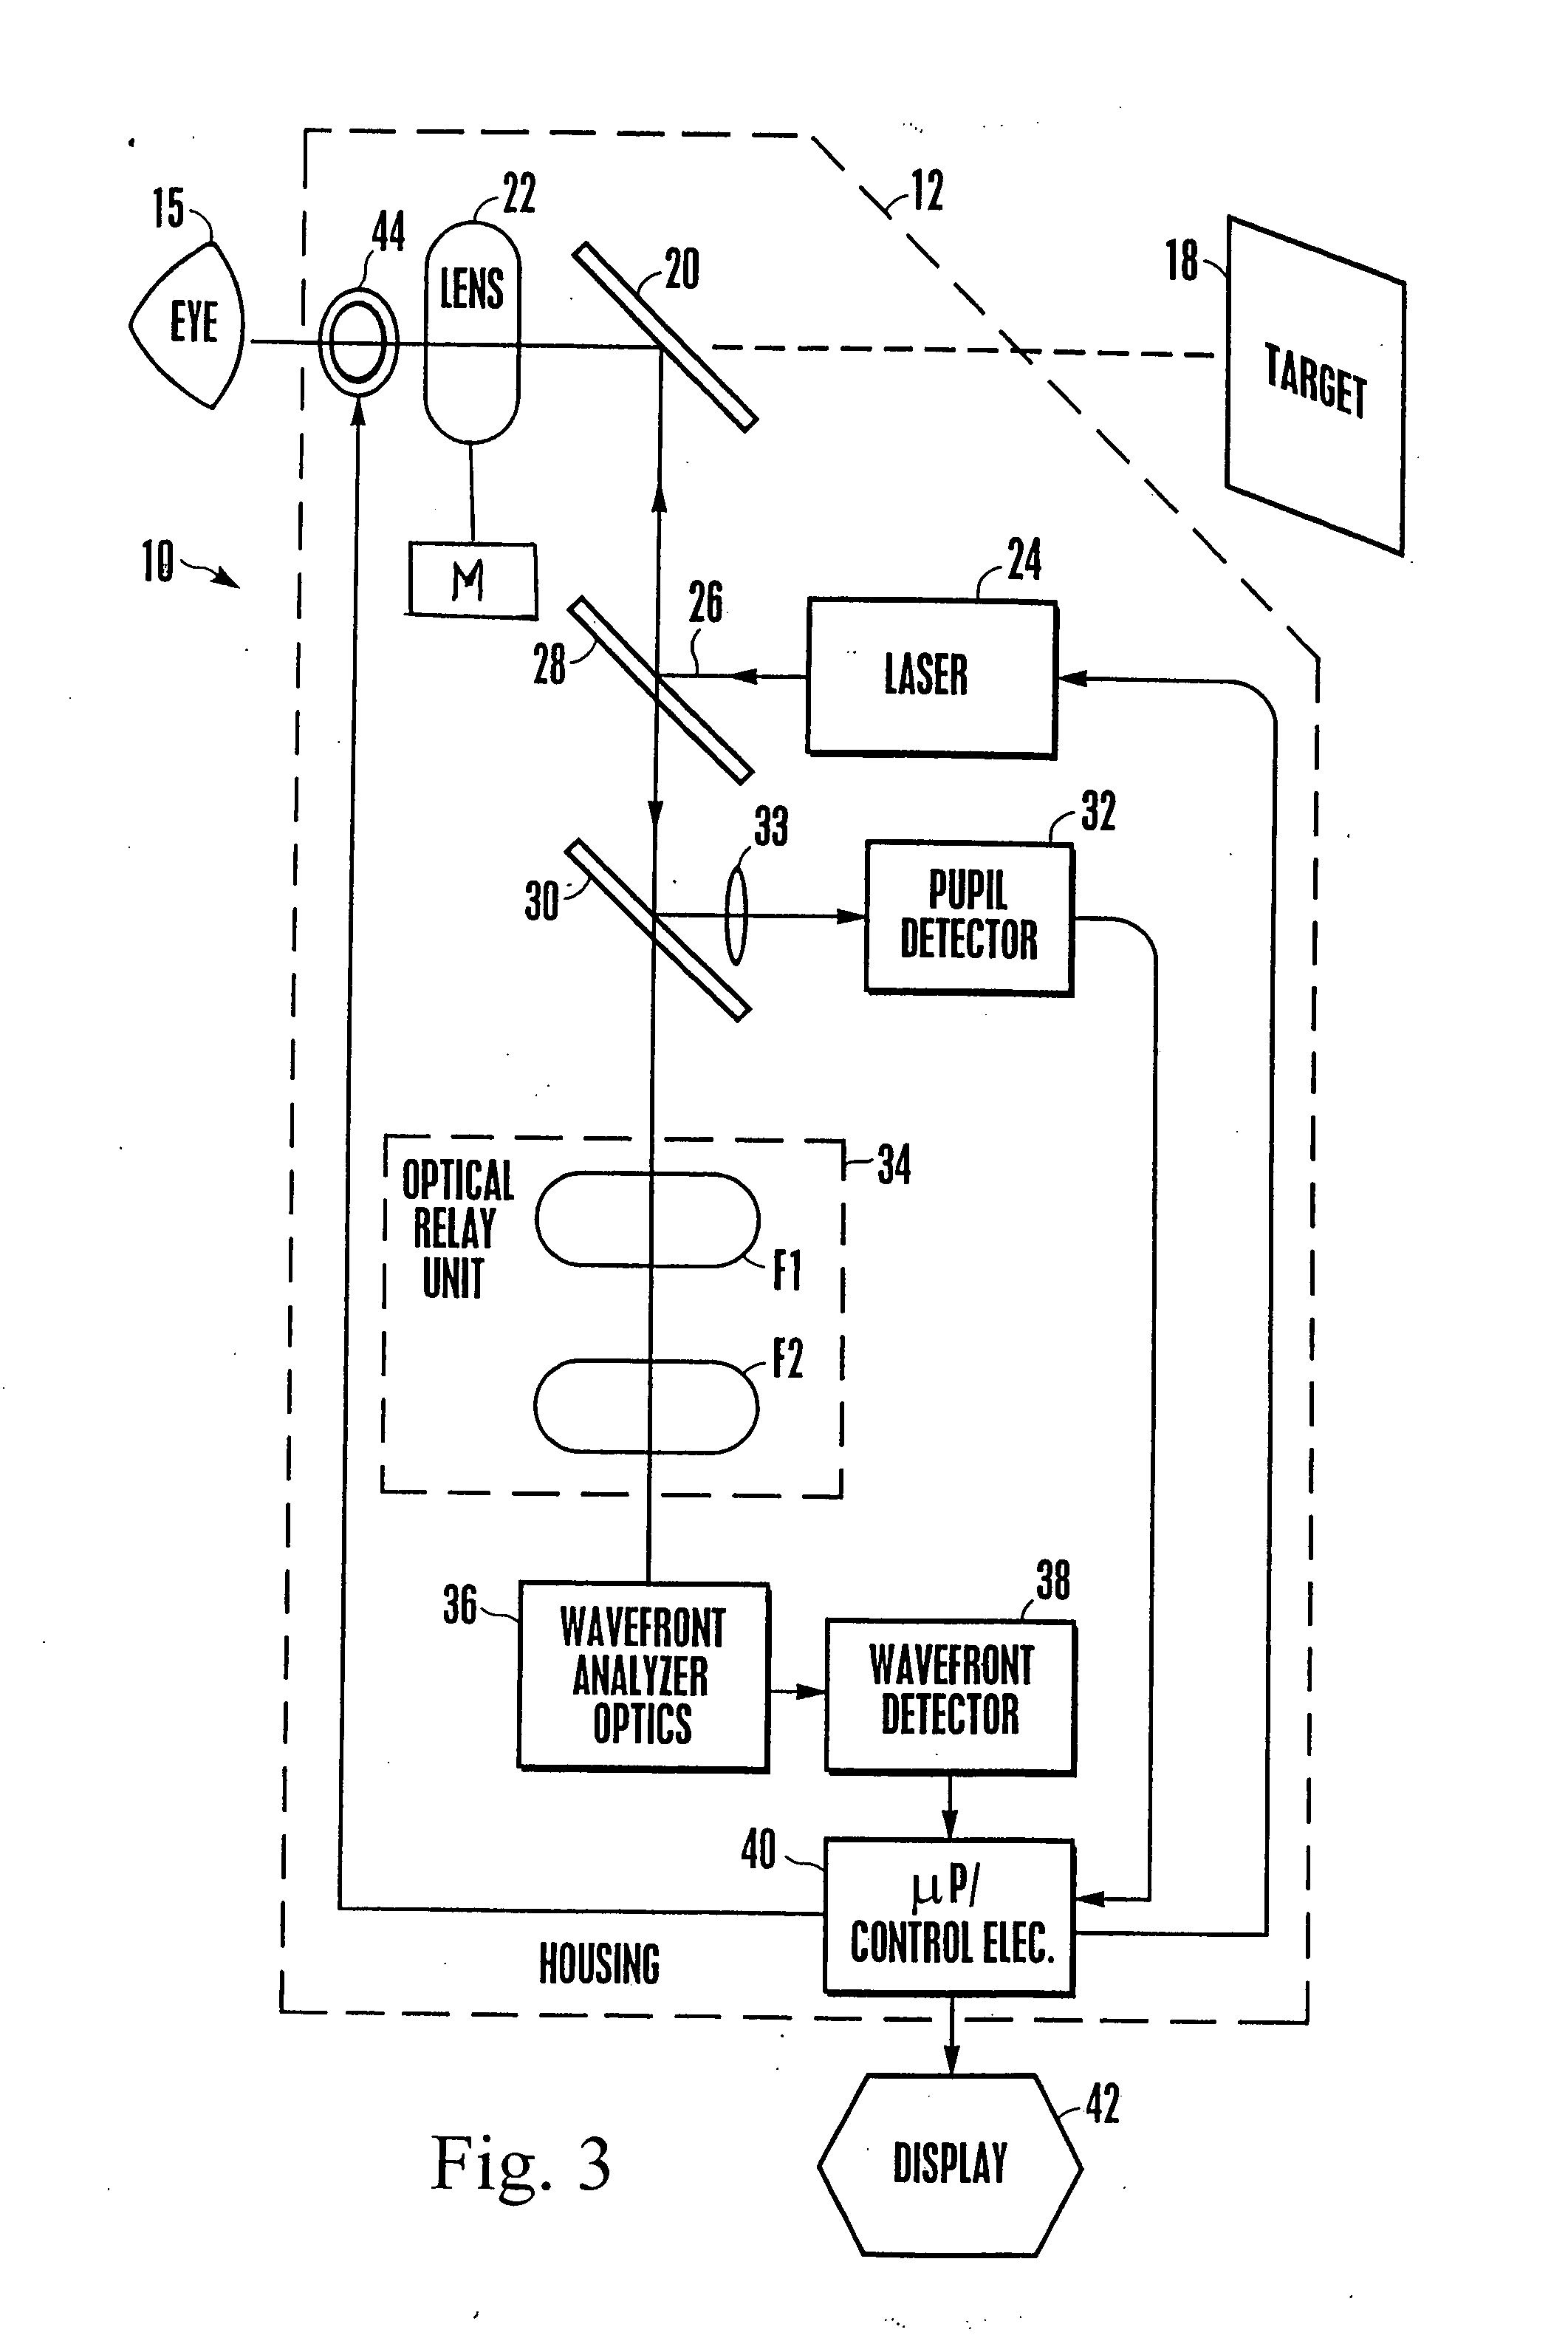 Apparatus and method for determining objective refraction using wavefront sensing